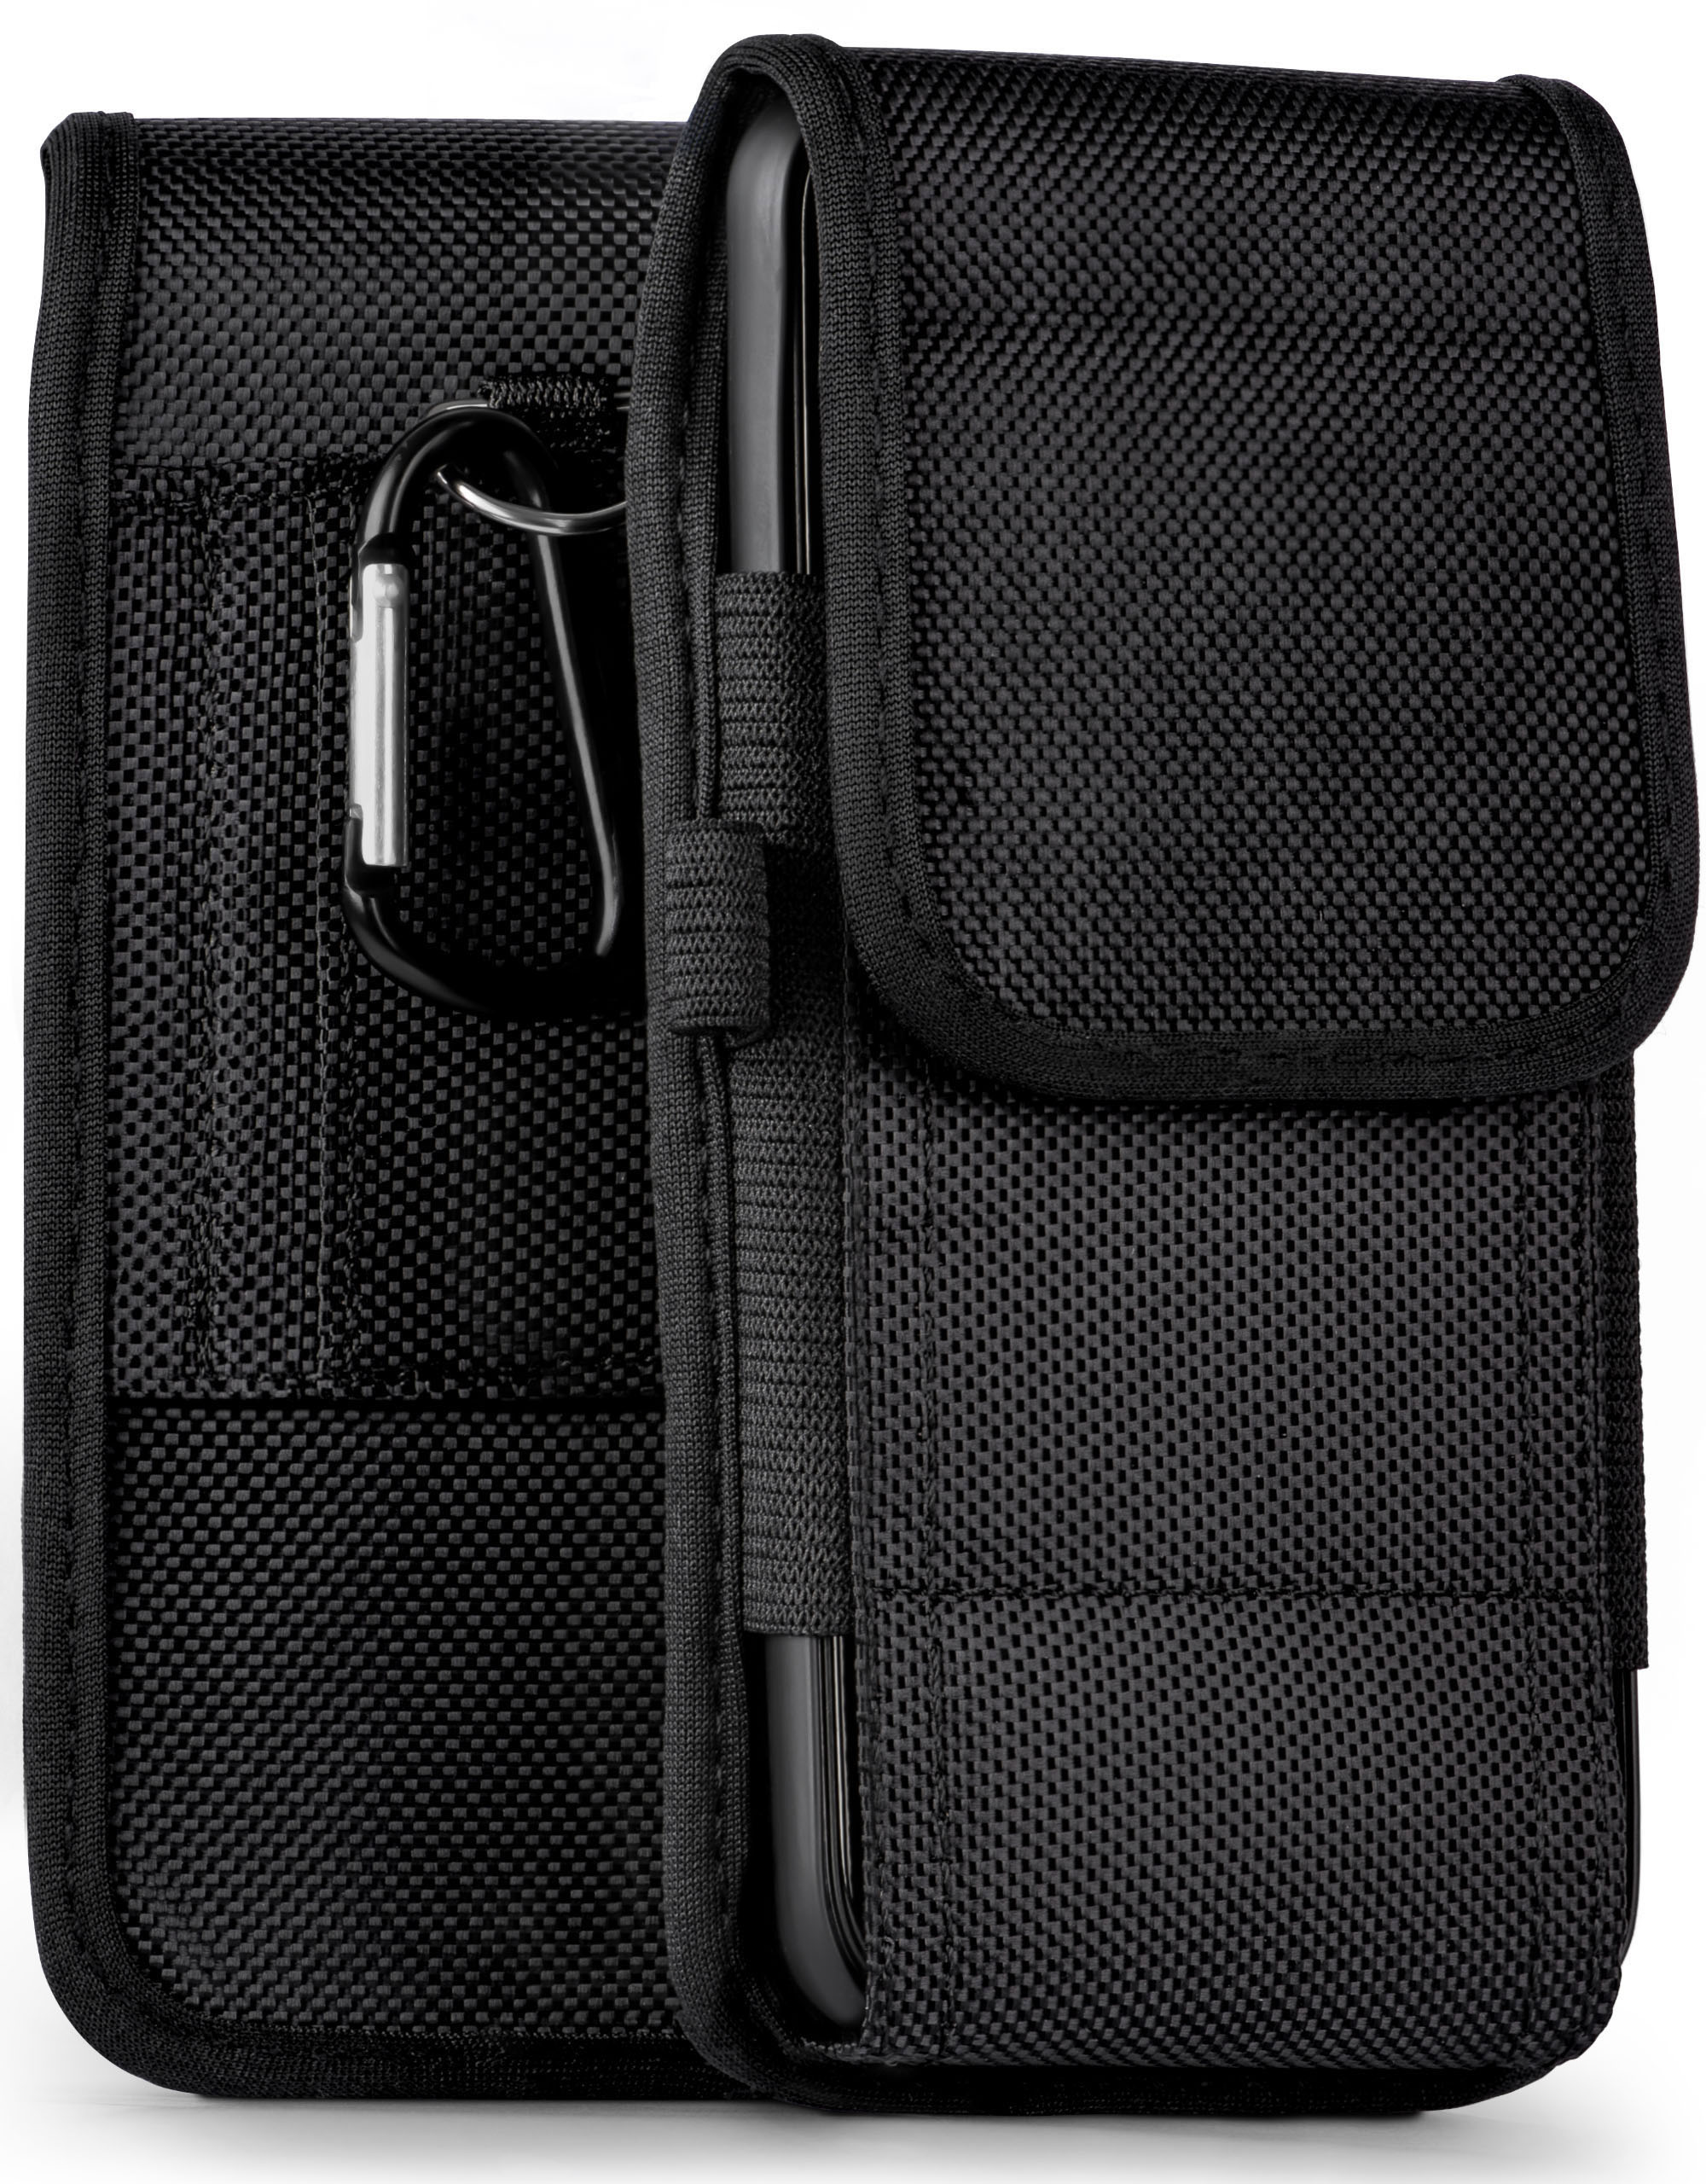 MOEX Case, C9 Agility Holster, Max, Neffos Trail TP-Link,